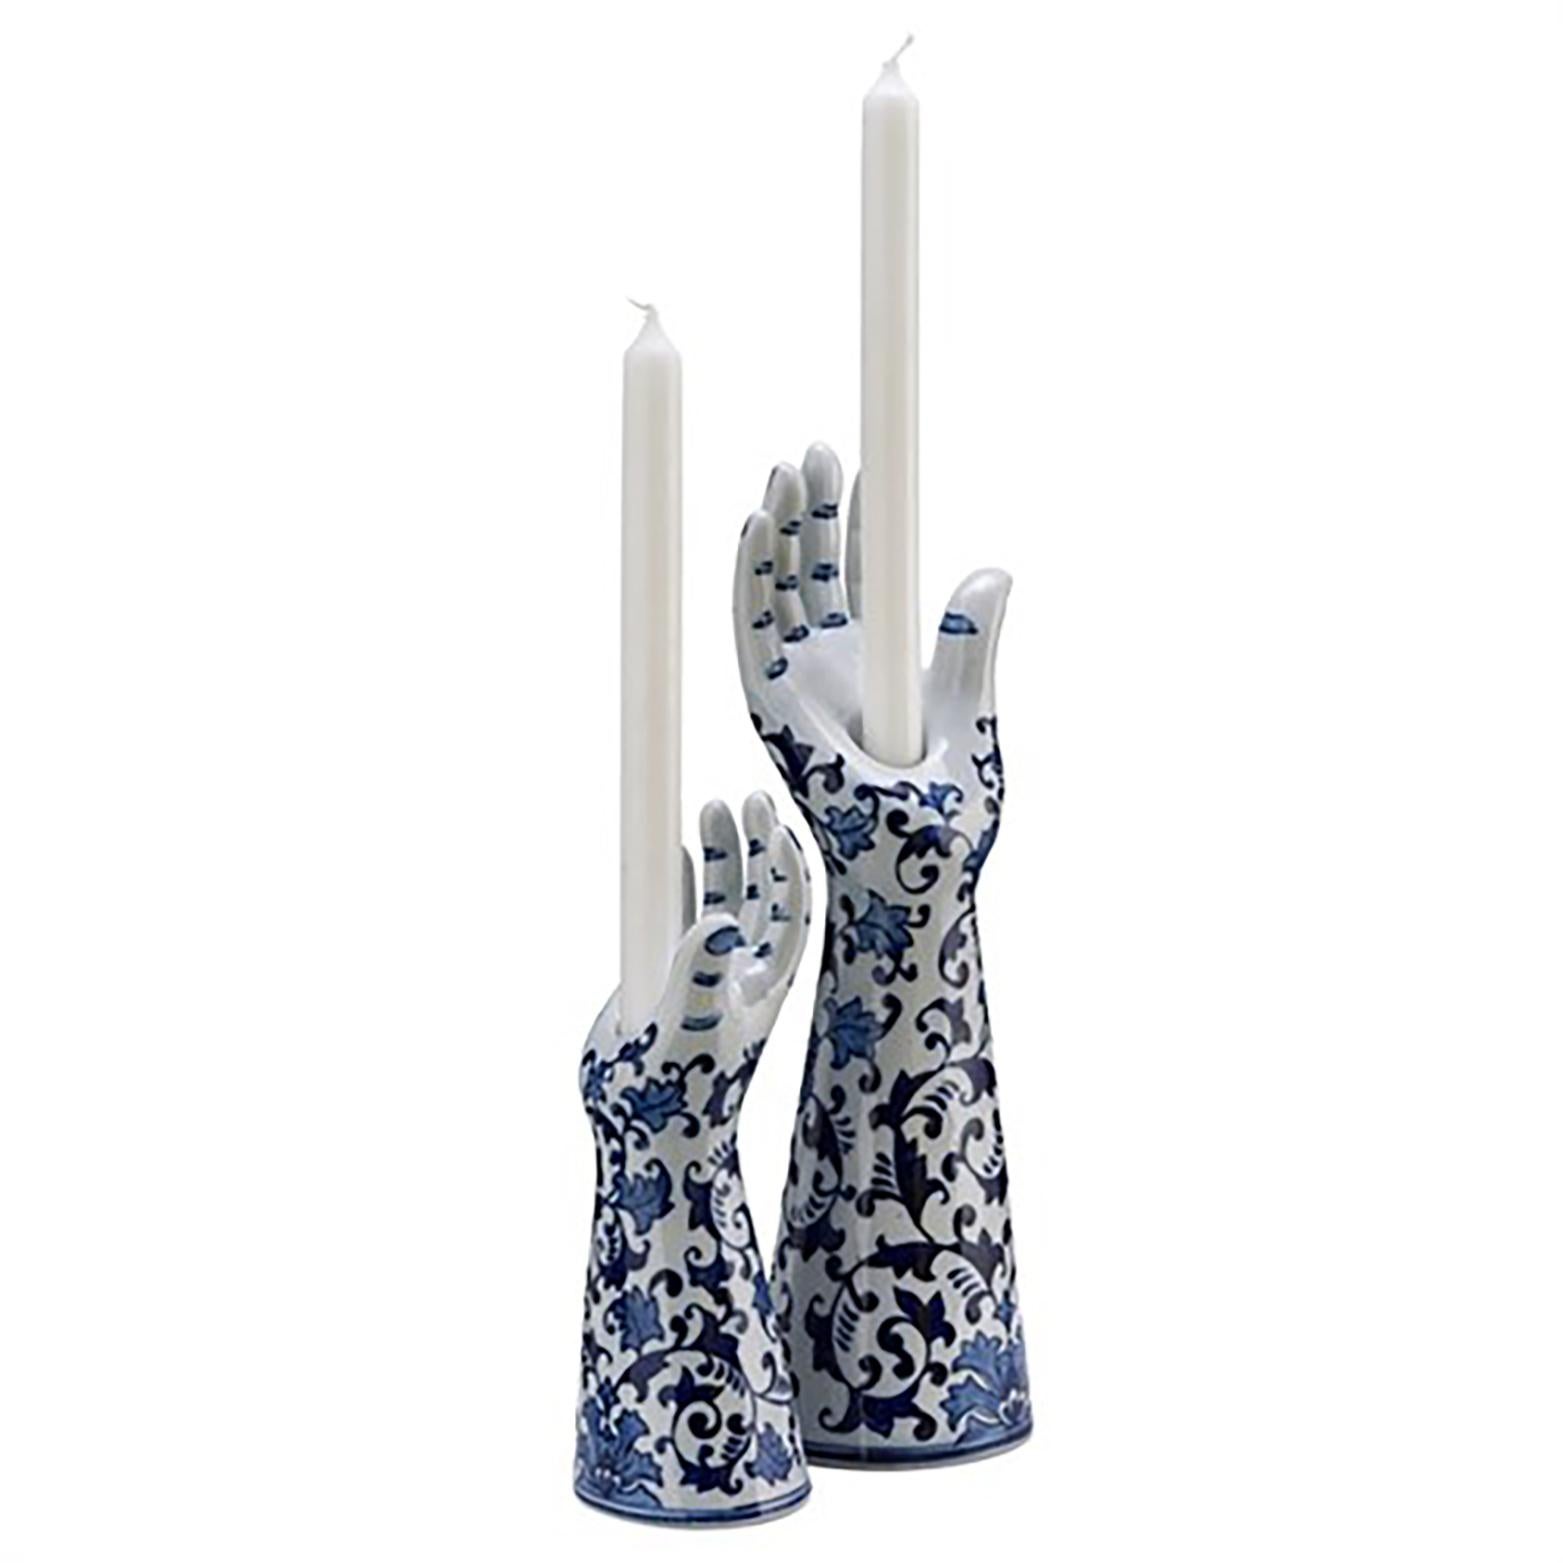 A candleholder in the shape of a human hand. This unique accessory is porcelain made with a glazed finish. A hand painted blue floral pattern wraps around the exterior. Holds one tapered candle. Crafted in the Netherlands.

Measurements:

15” H